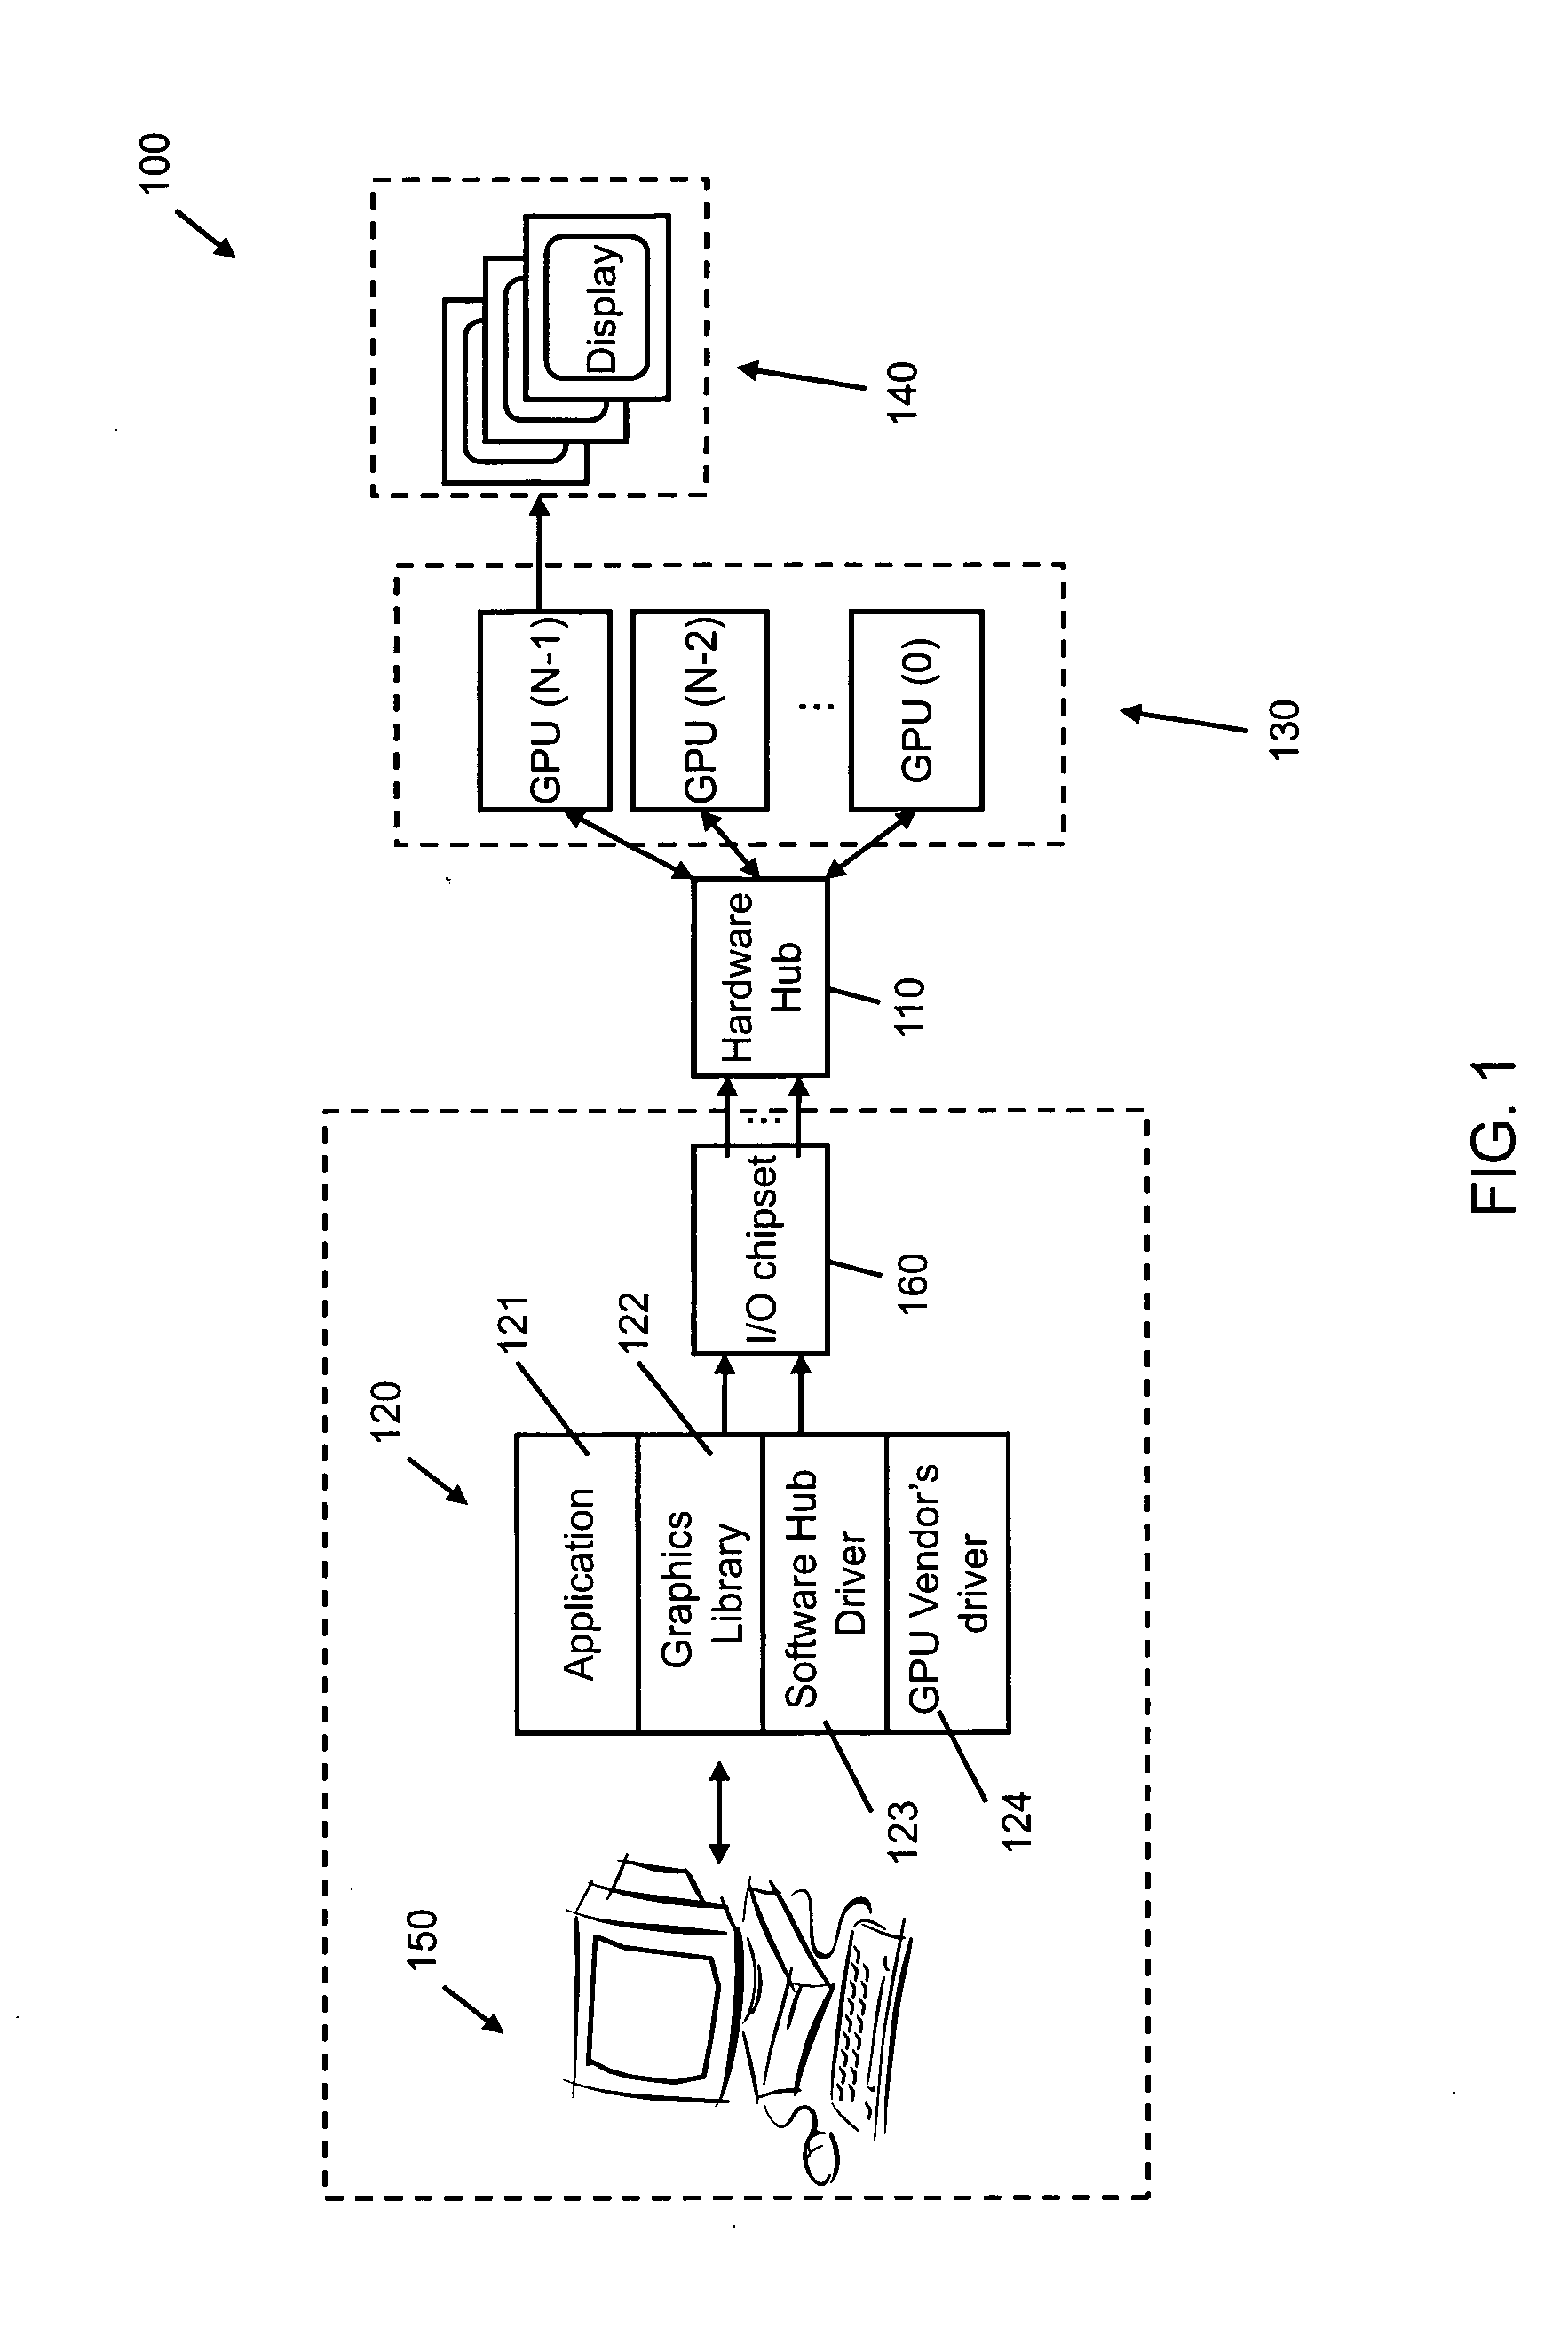 PC-based computing system employing a multi-GPU graphics pipeline architecture supporting multiple modes of GPU parallelization dymamically controlled while running a graphics application